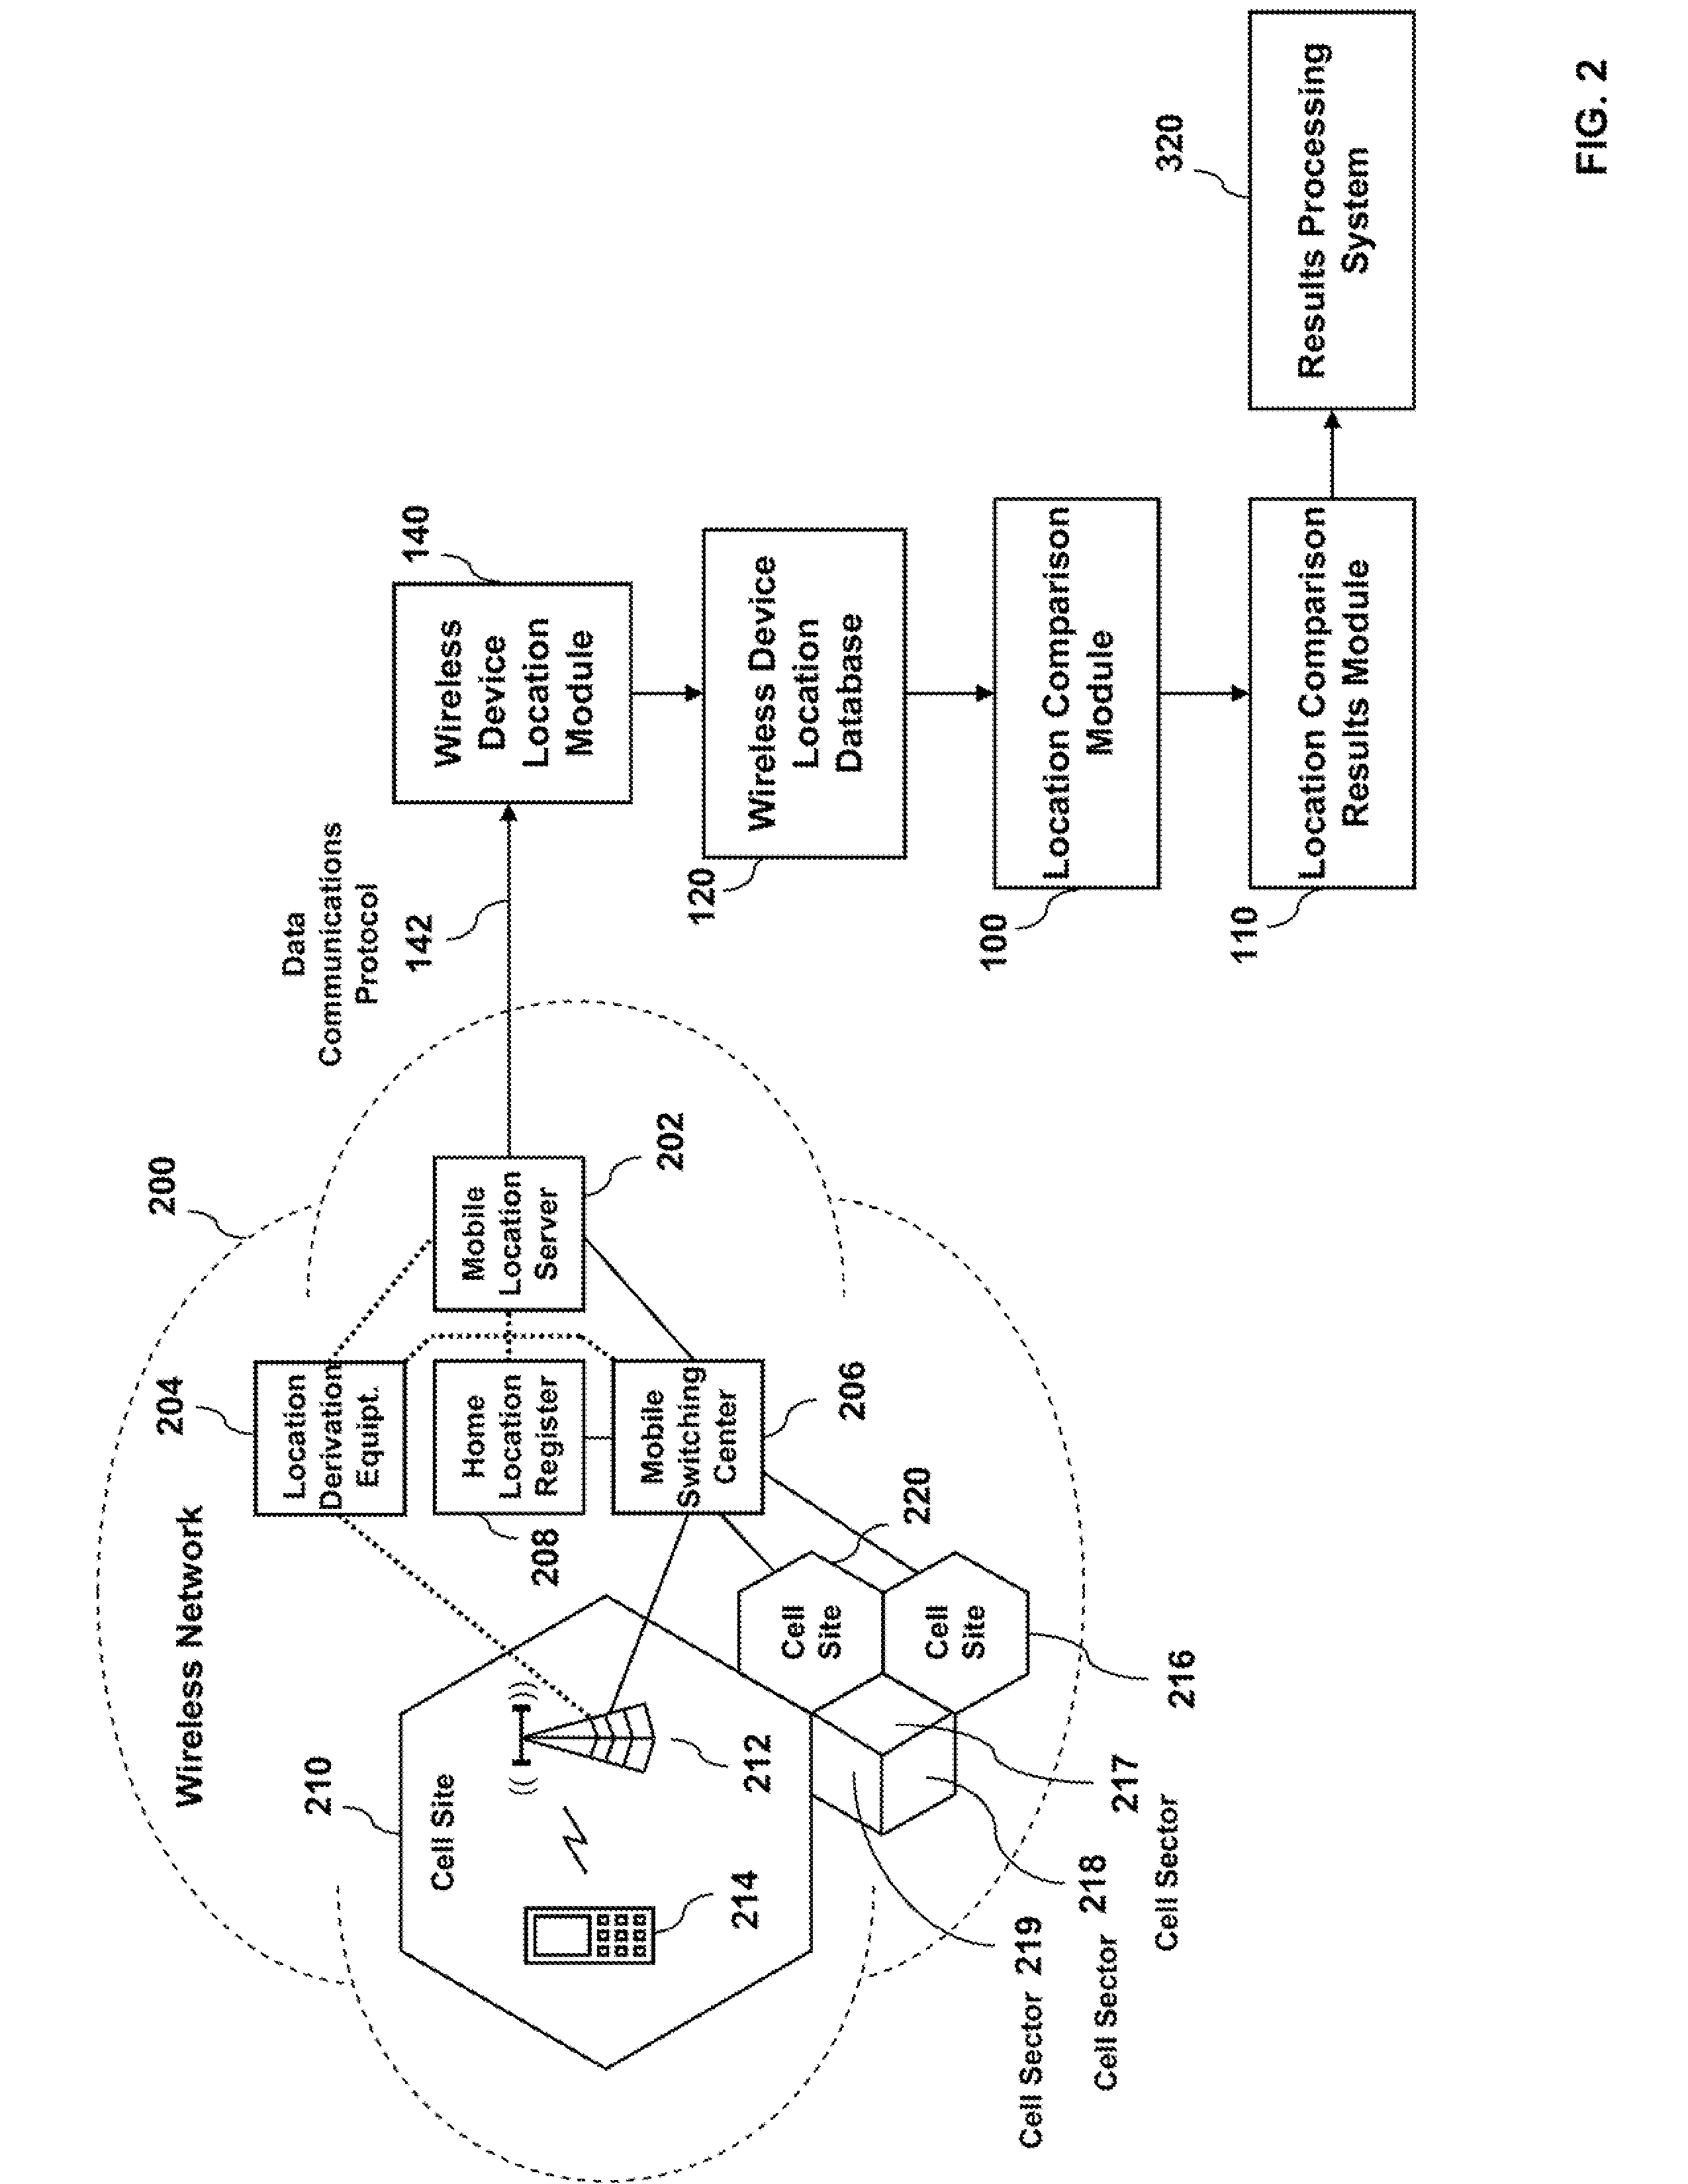 System and method for automated analysis comparing a wireless device location with another geographic location